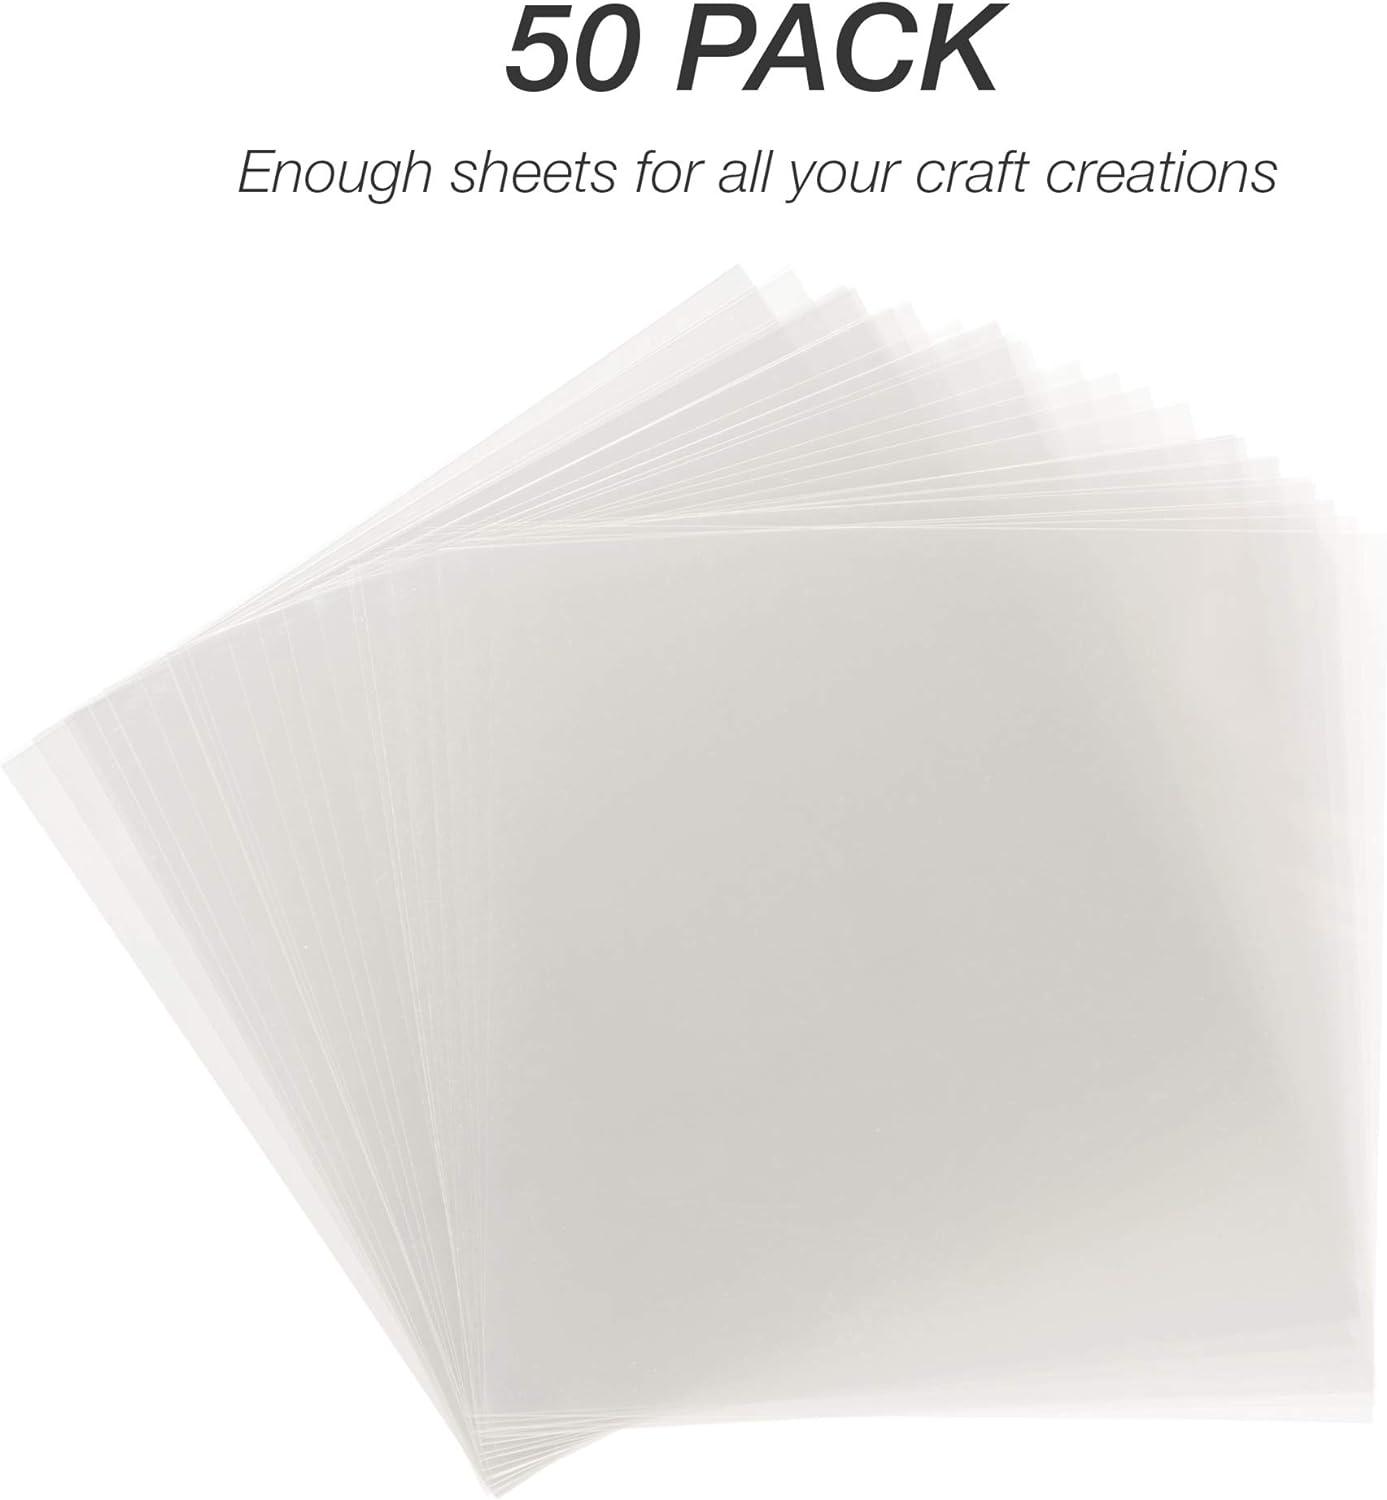 Samsill 50 Pack 12 inch x 12 inch .007 Clear Craft Plastic Sheet Compatible with Cricut, Great for Stencils, Cards, Journals, Crafts, 3D